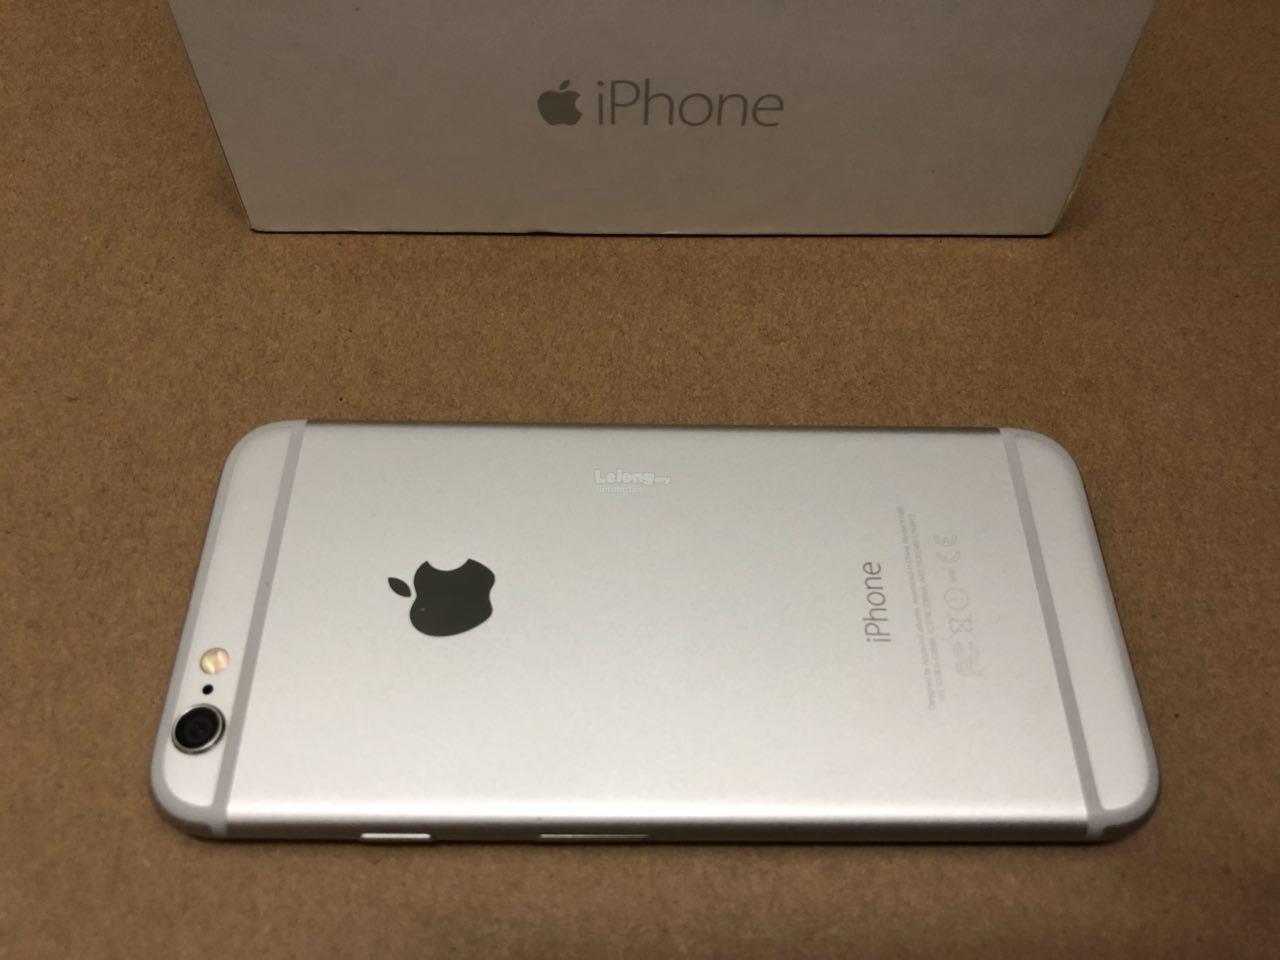 Apple Iphone 6 64gb Used End 2 10 18 12 15 Pm